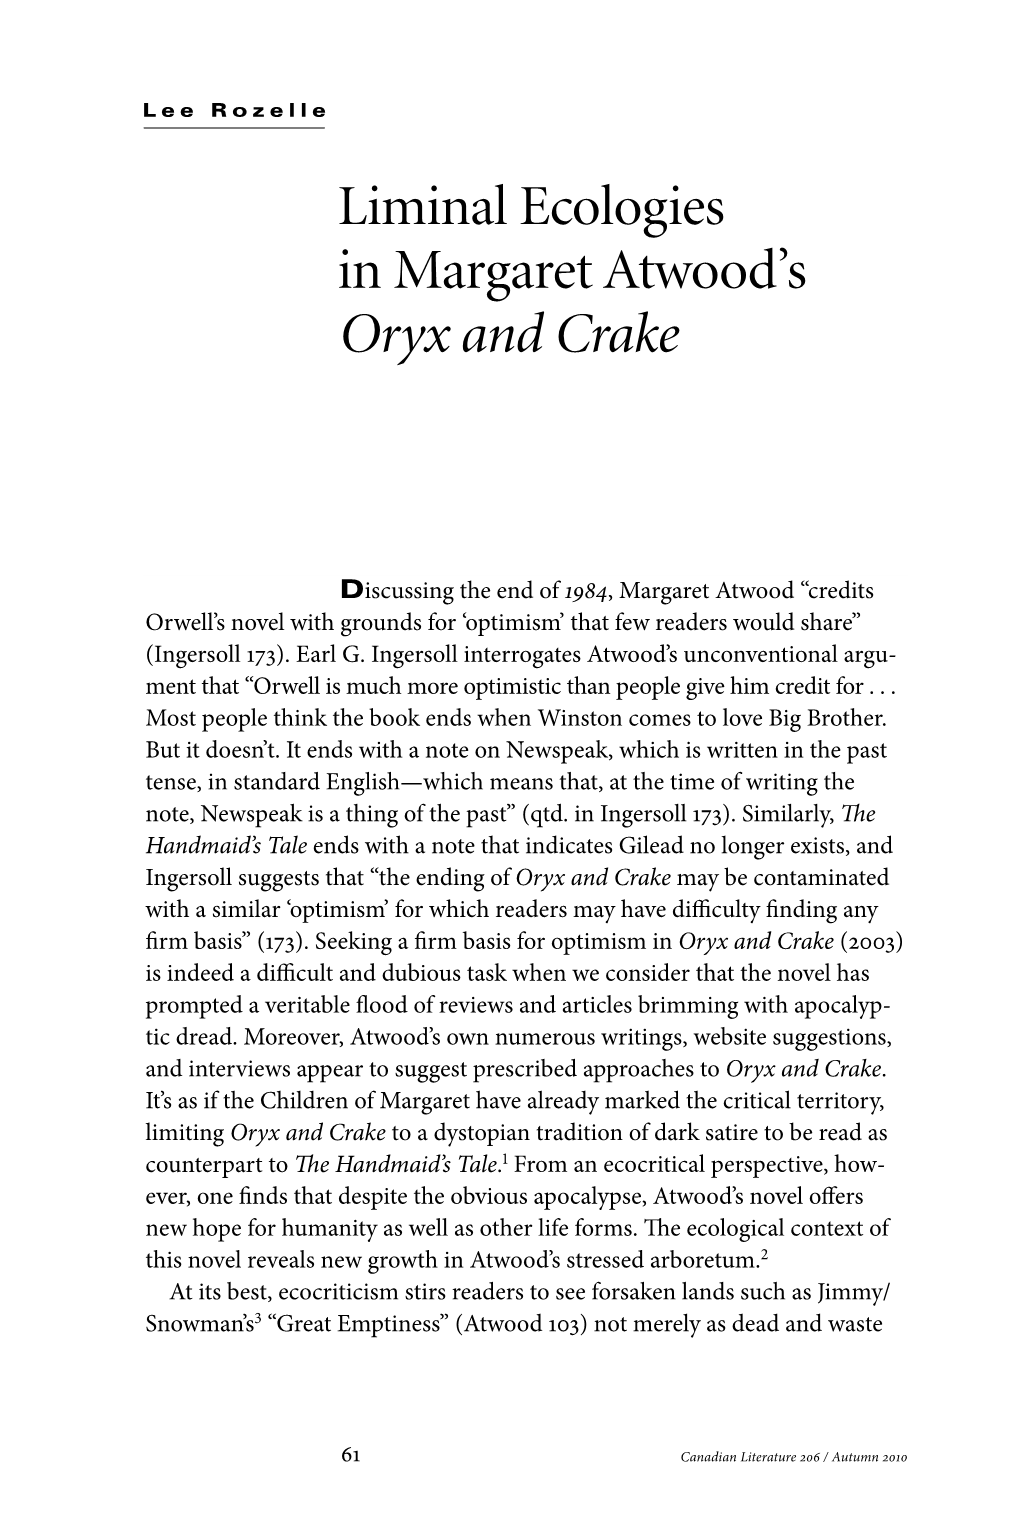 Liminal Ecologies in Margaret Atwood's Oryx and Crake